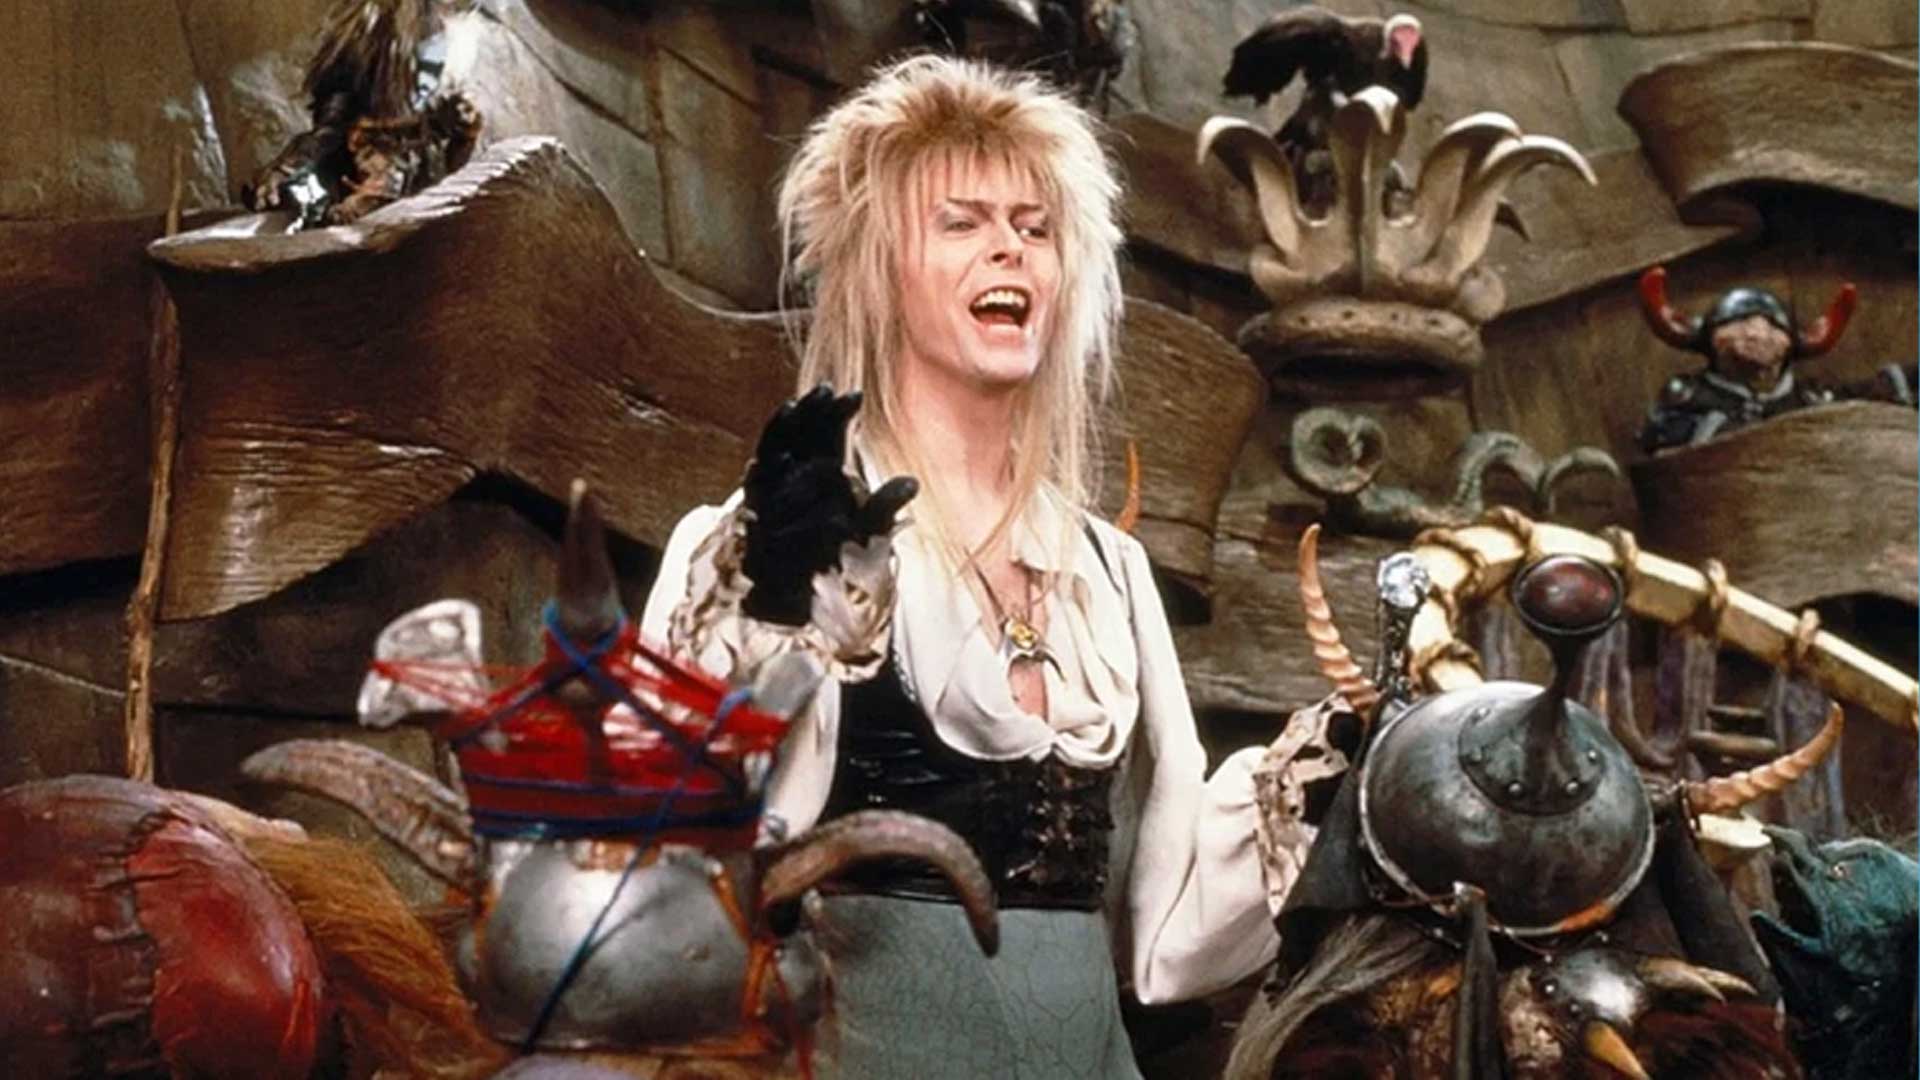 A scene from Labyrinth